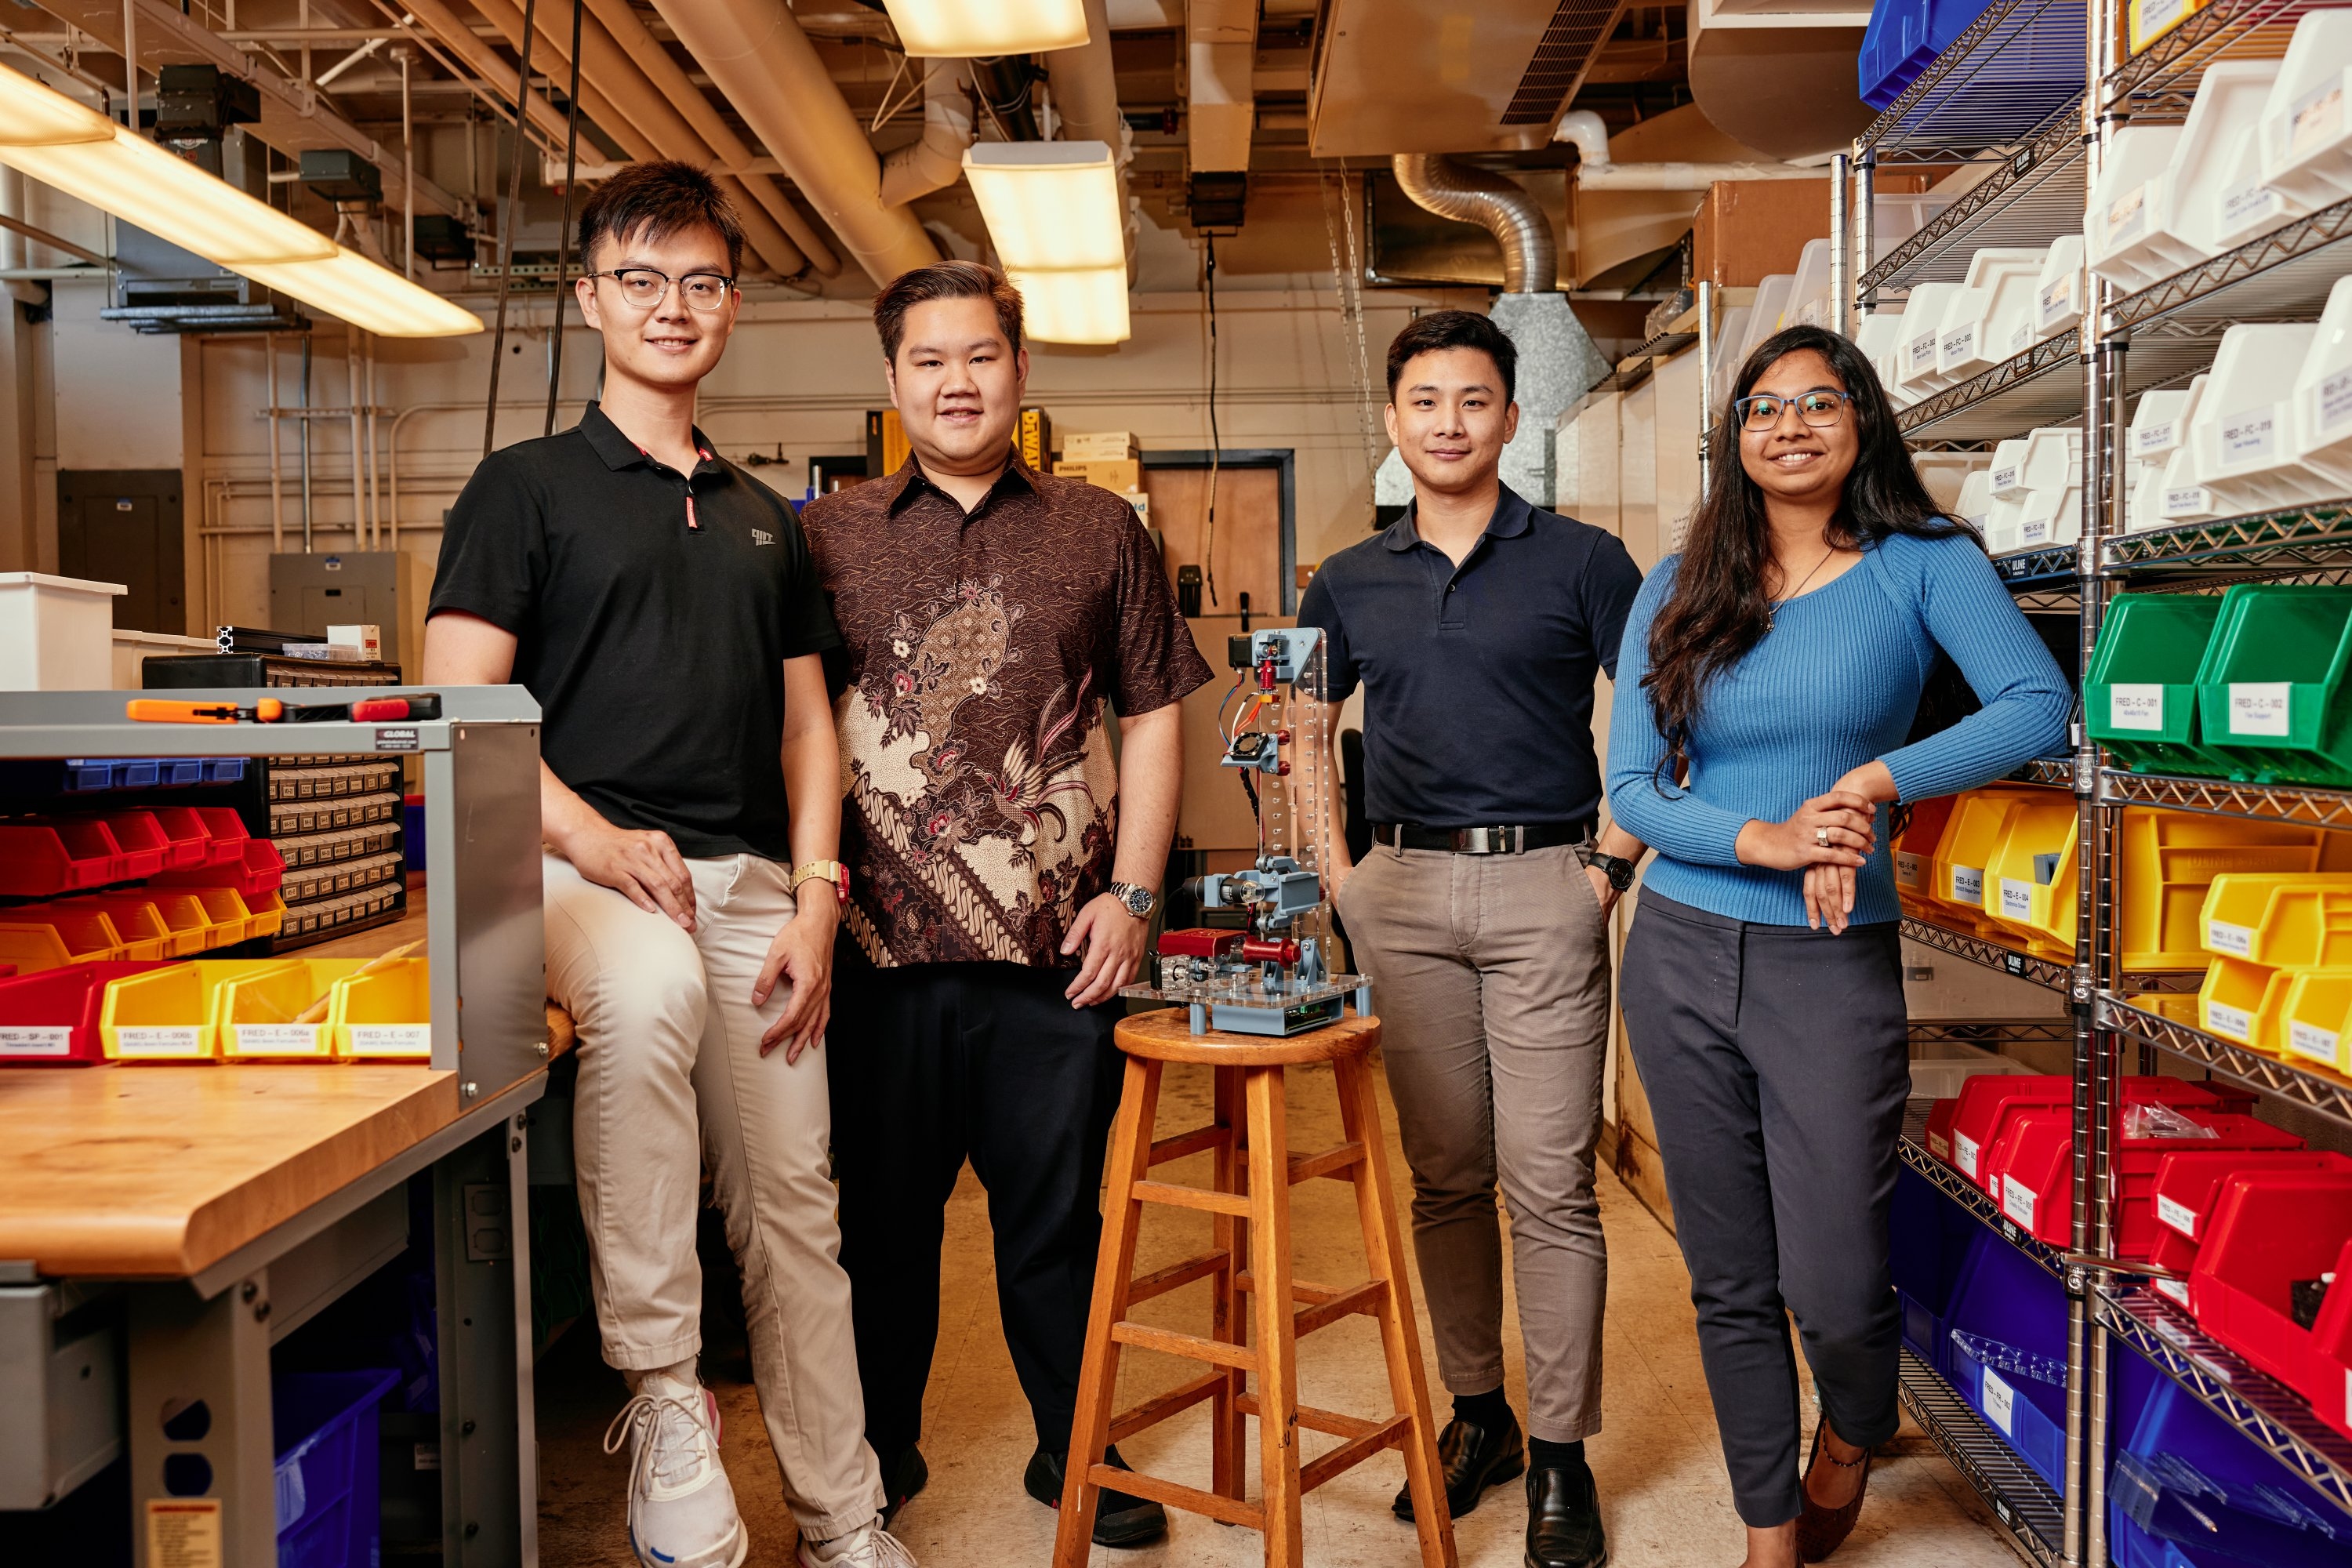 A team of MIT graduate students designed a low-cost desktop fiber extrusion device (FrED) and set up an assembly factory inside an MIT lab. Left to right: Rui Li MEng '22, Russel Bradley, Tanach Rojrungsasithorn MEng '22, and Aviva Jesse Levi MEng '22, pose with FrED.